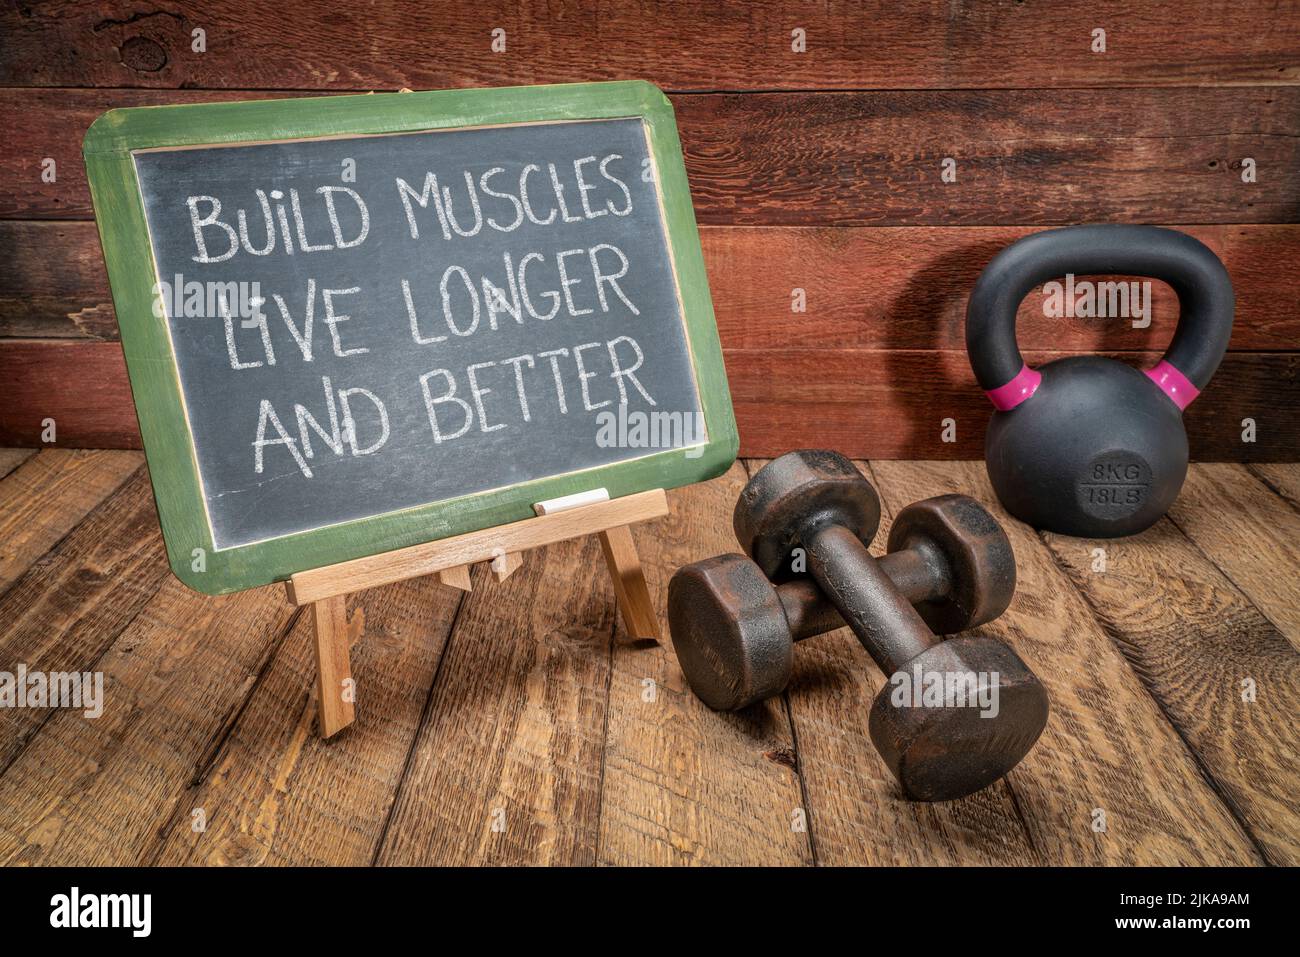 build muscles, live longer and better - inspirational text on a blackboard with dumbbells and kettlebell, fitness and longevity concept Stock Photo